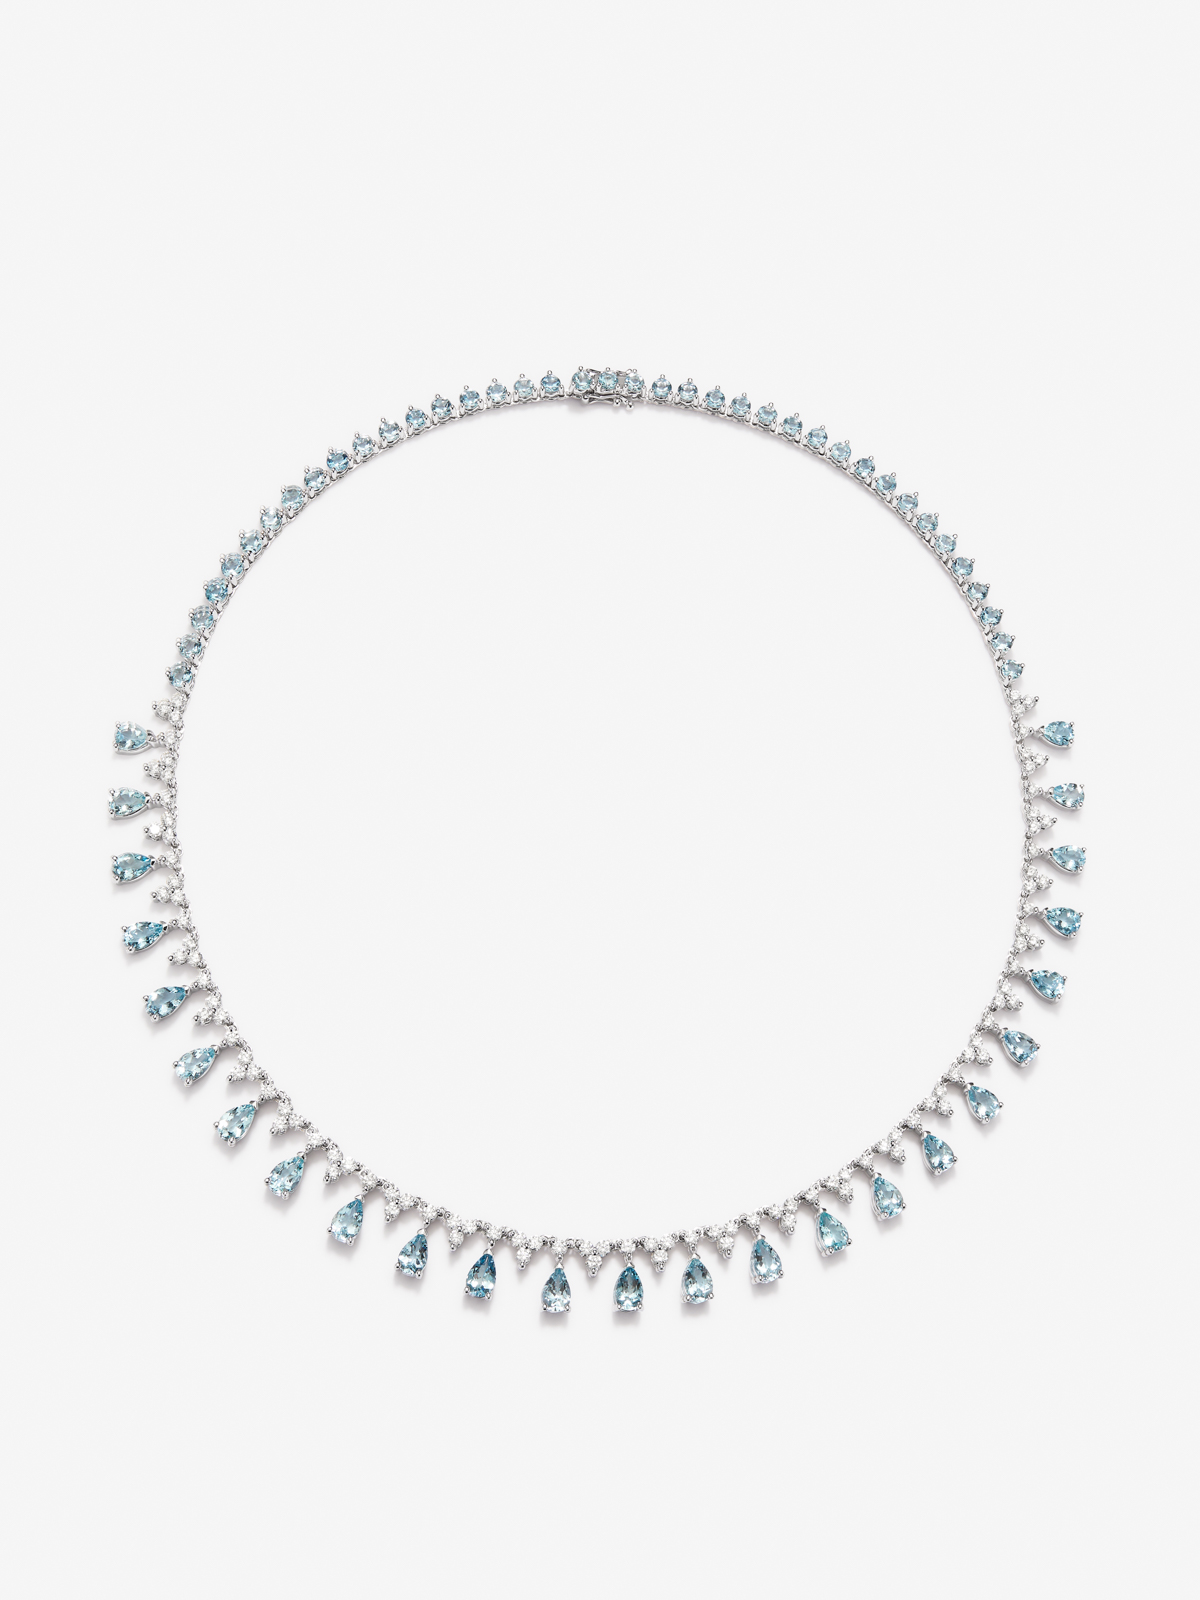 18K White Gold Rivière Collar with blue and bright blue aquamarines of 14.19 cts and white diamonds in bright size of 3.82 cts